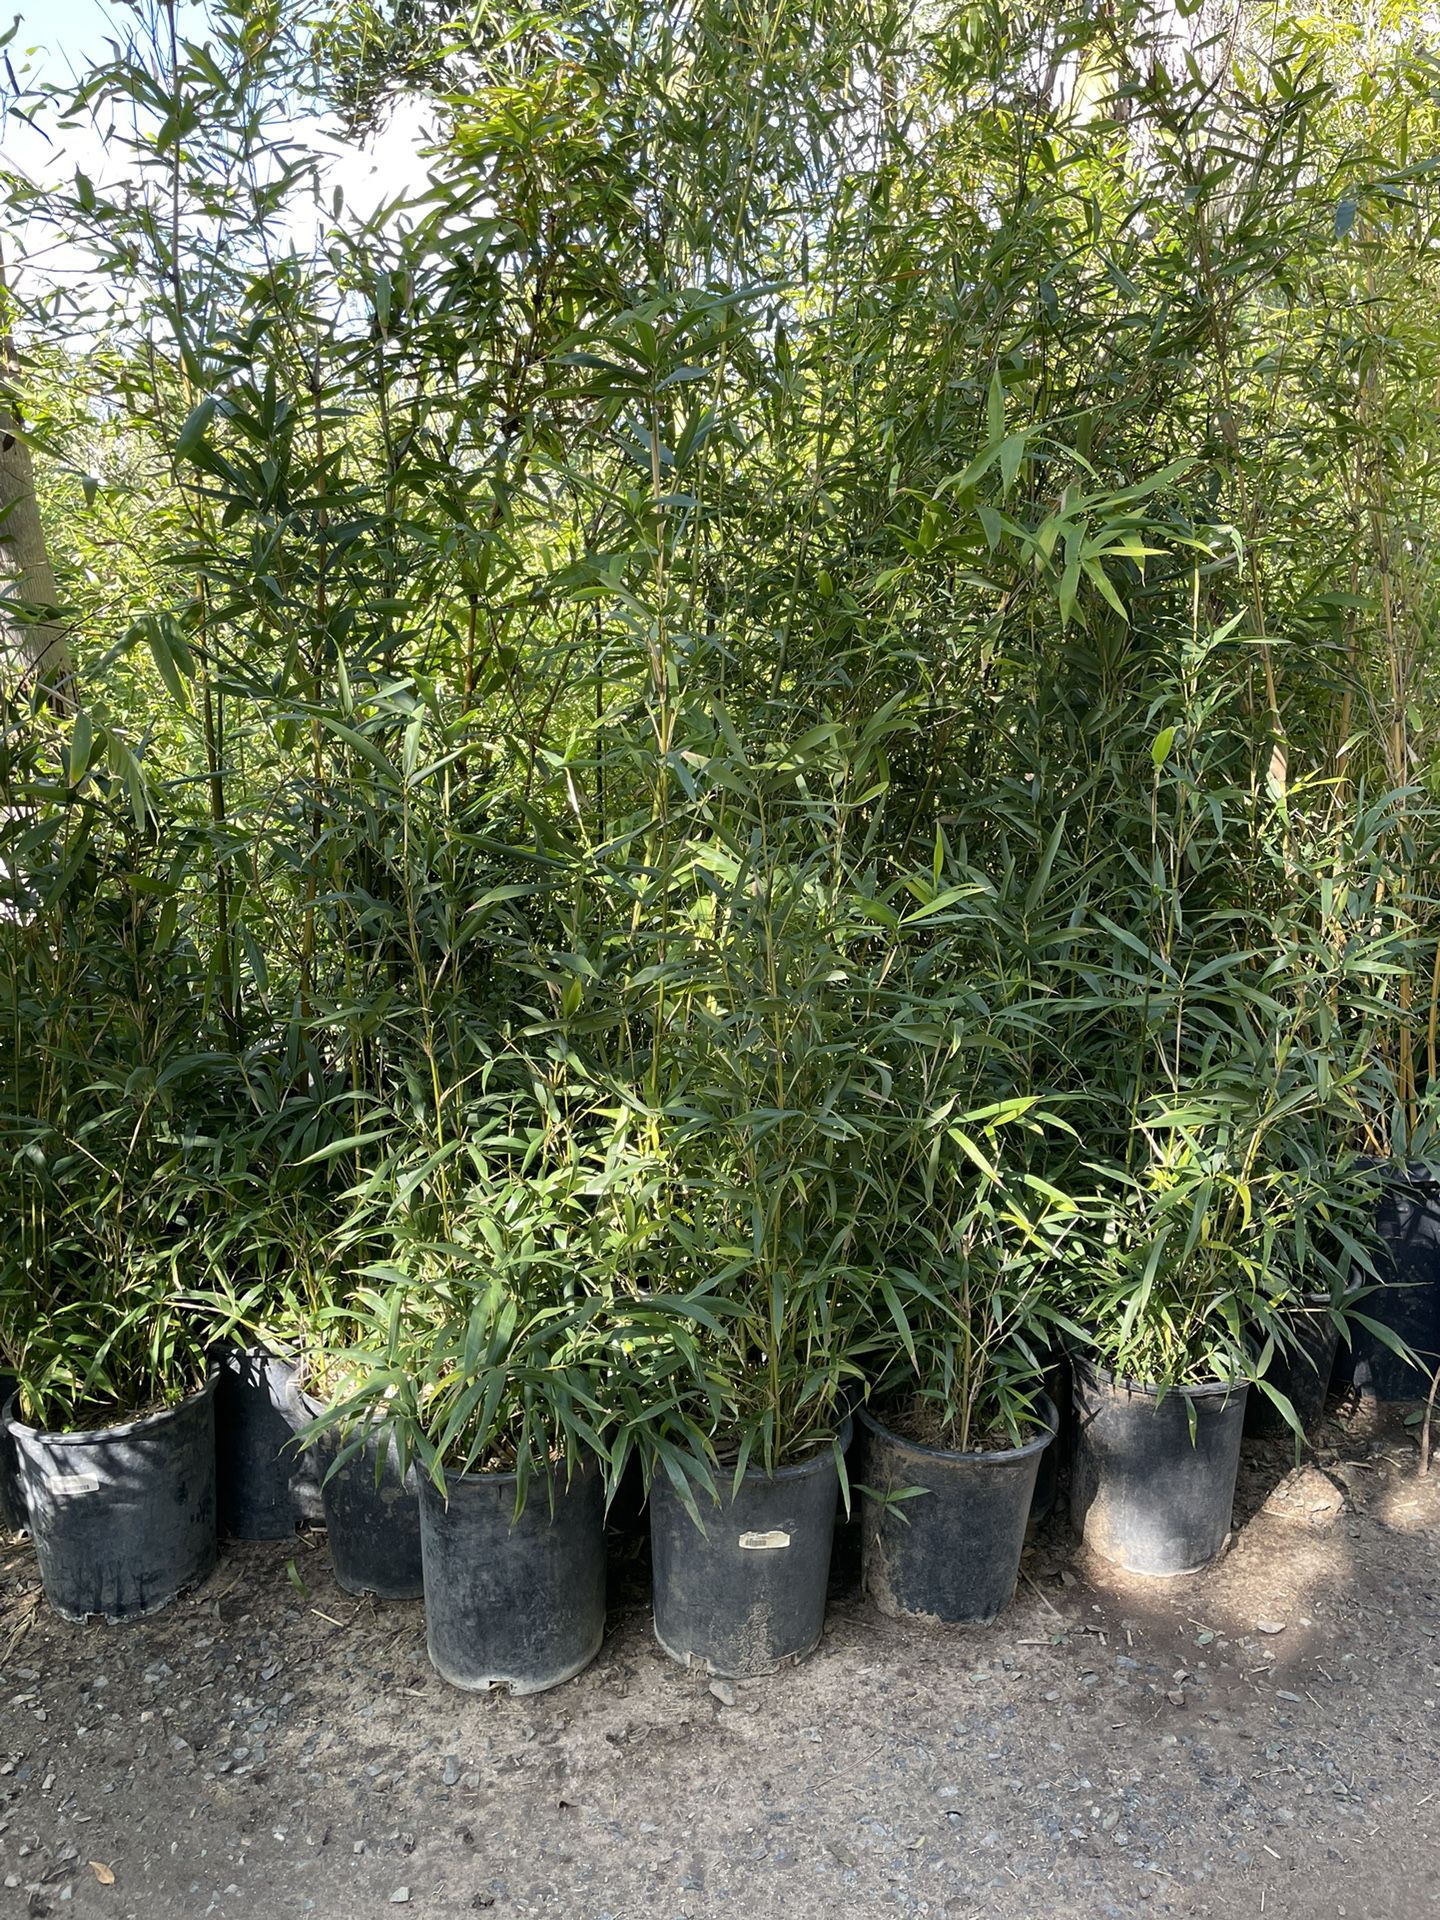 5 Gallon Size Bamboo- Approximately 4-6 Feet Tall - Both Running And Clumping Varieties Available 